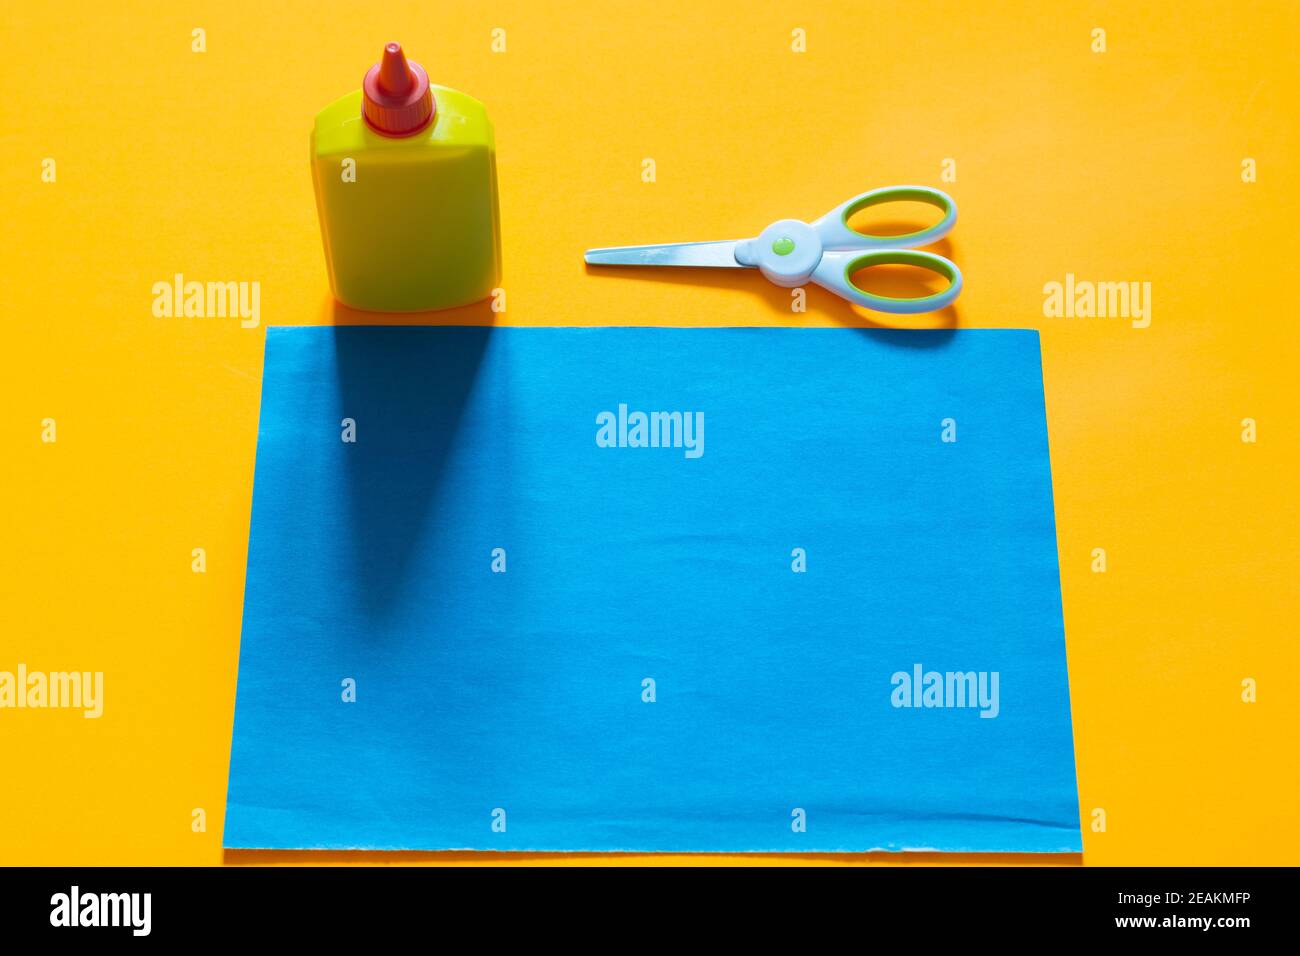 https://c8.alamy.com/comp/2EAKMFP/on-a-yellow-background-lies-a-sheet-of-blue-colored-paper-next-to-it-there-is-a-tube-of-glue-and-scissors-2EAKMFP.jpg